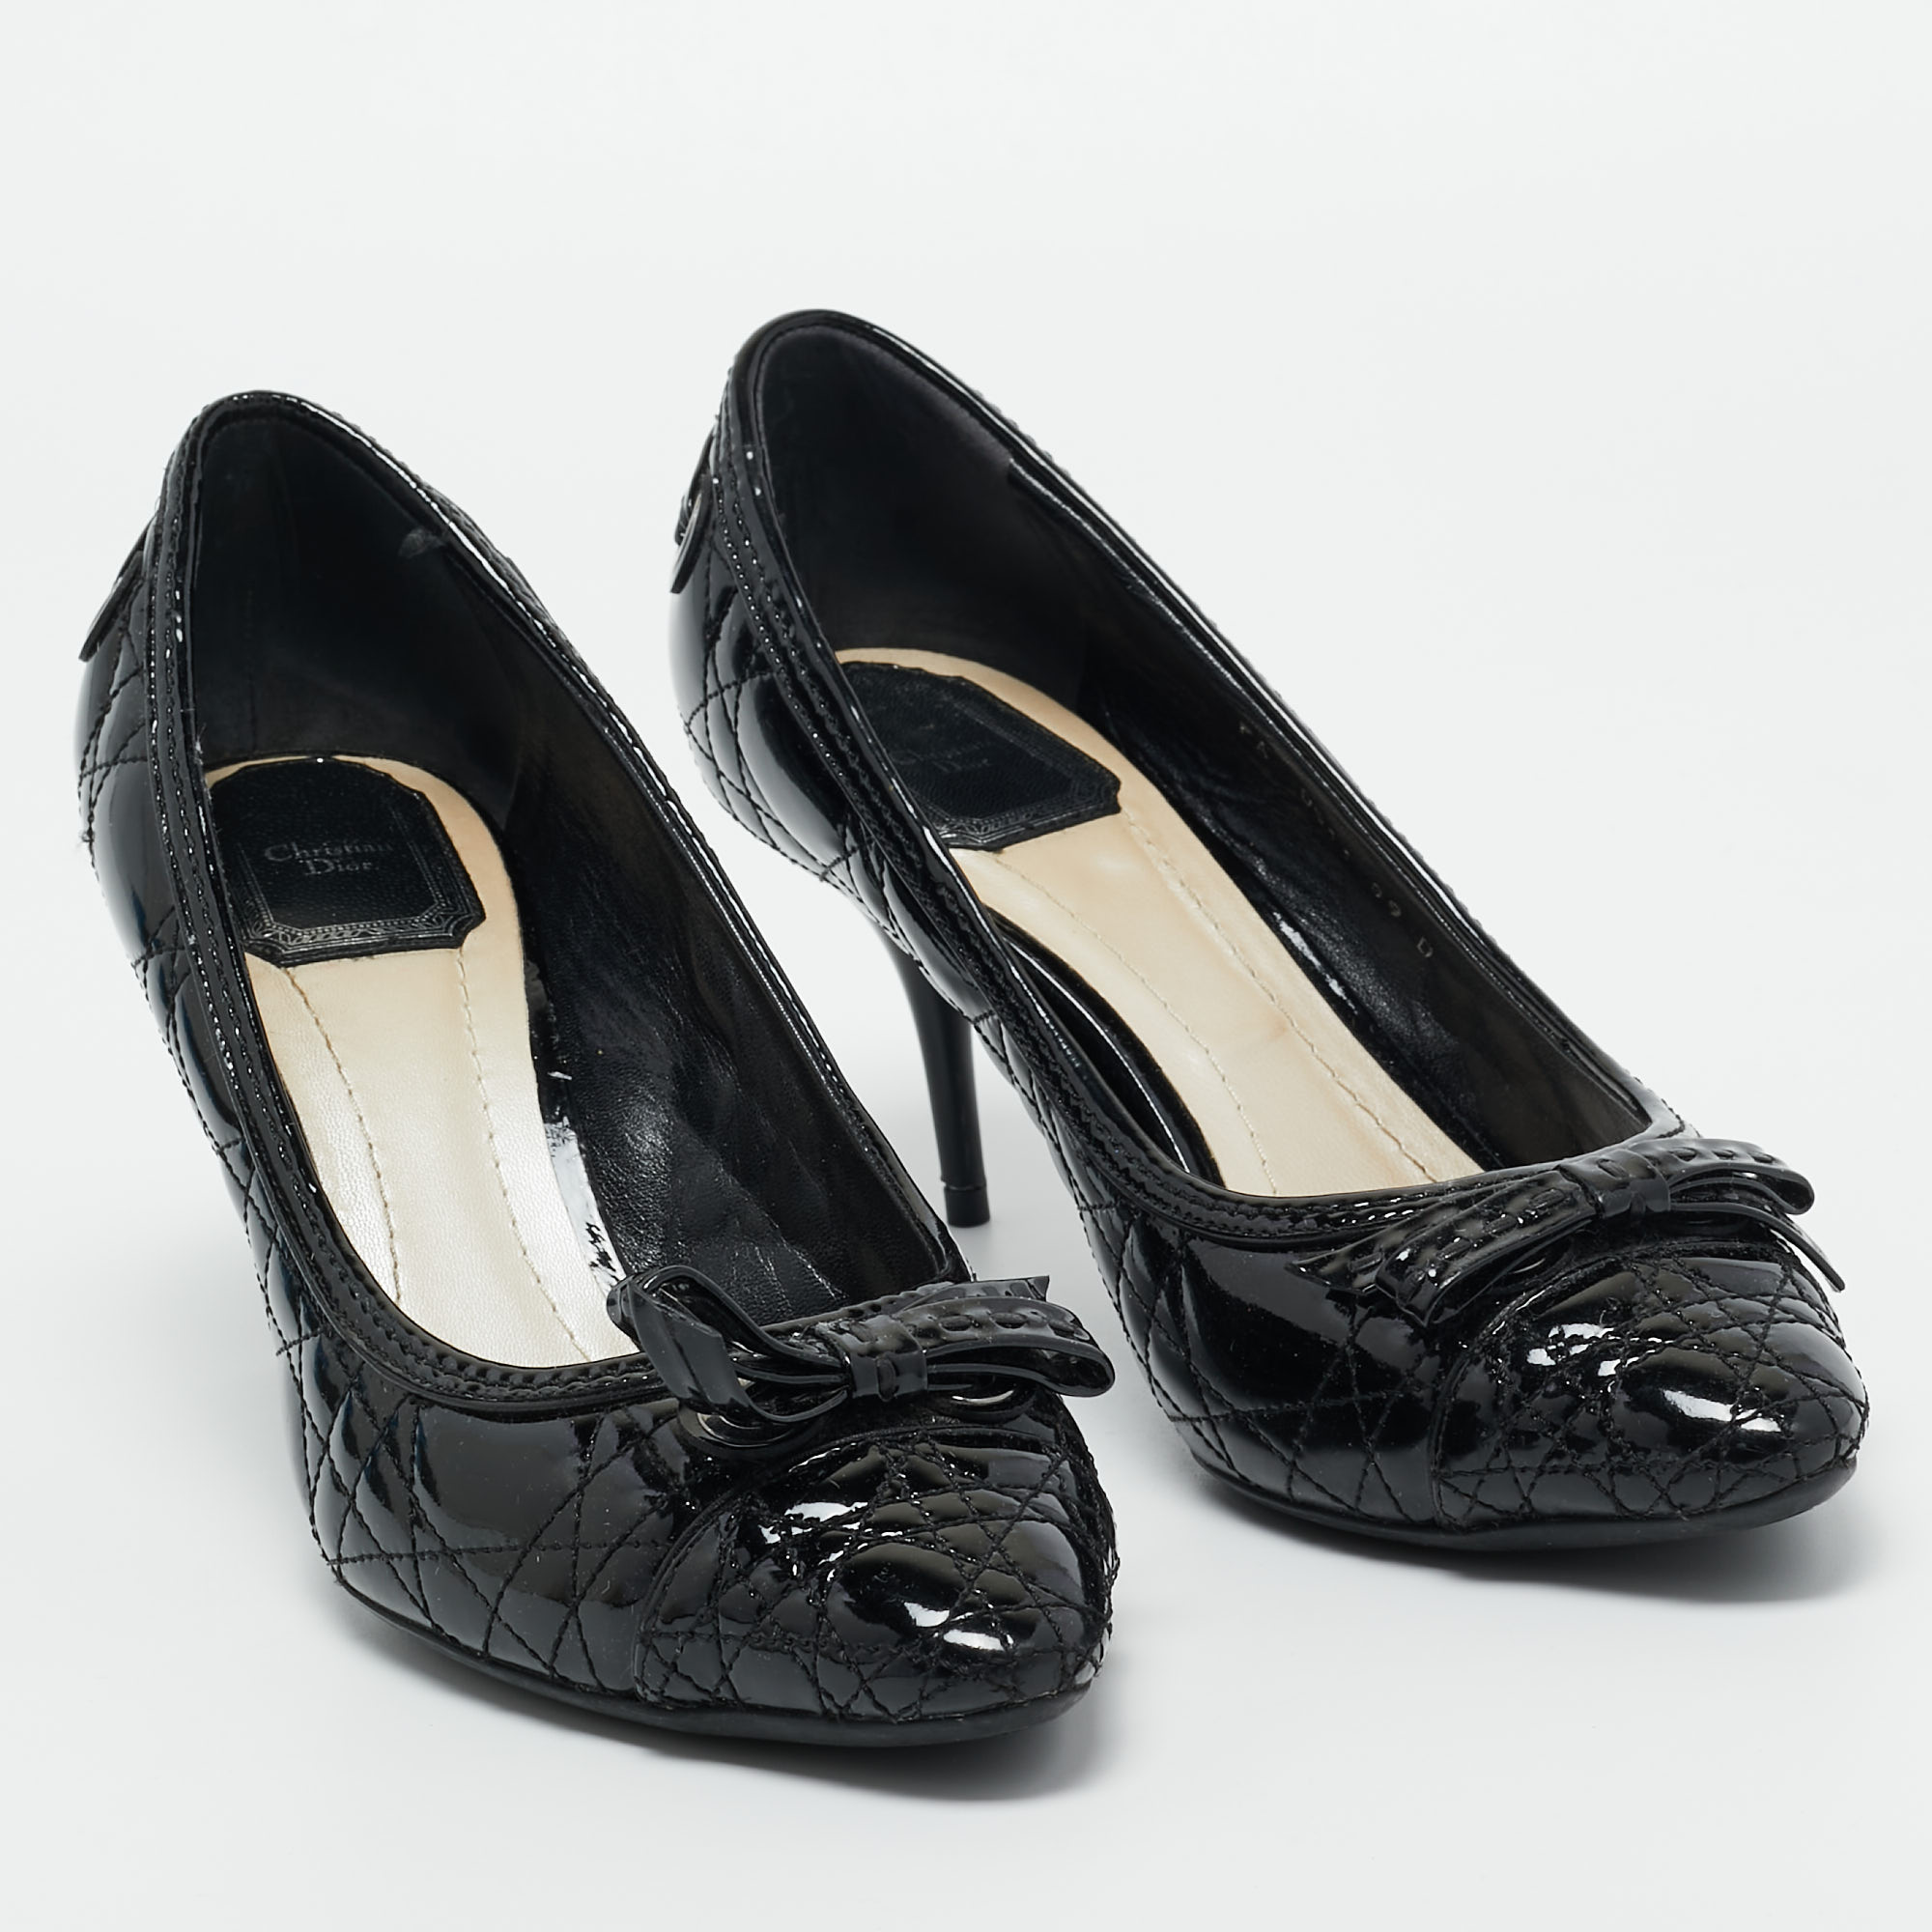 Dior Black Cannage Patent Leather Bow Pumps Size 39